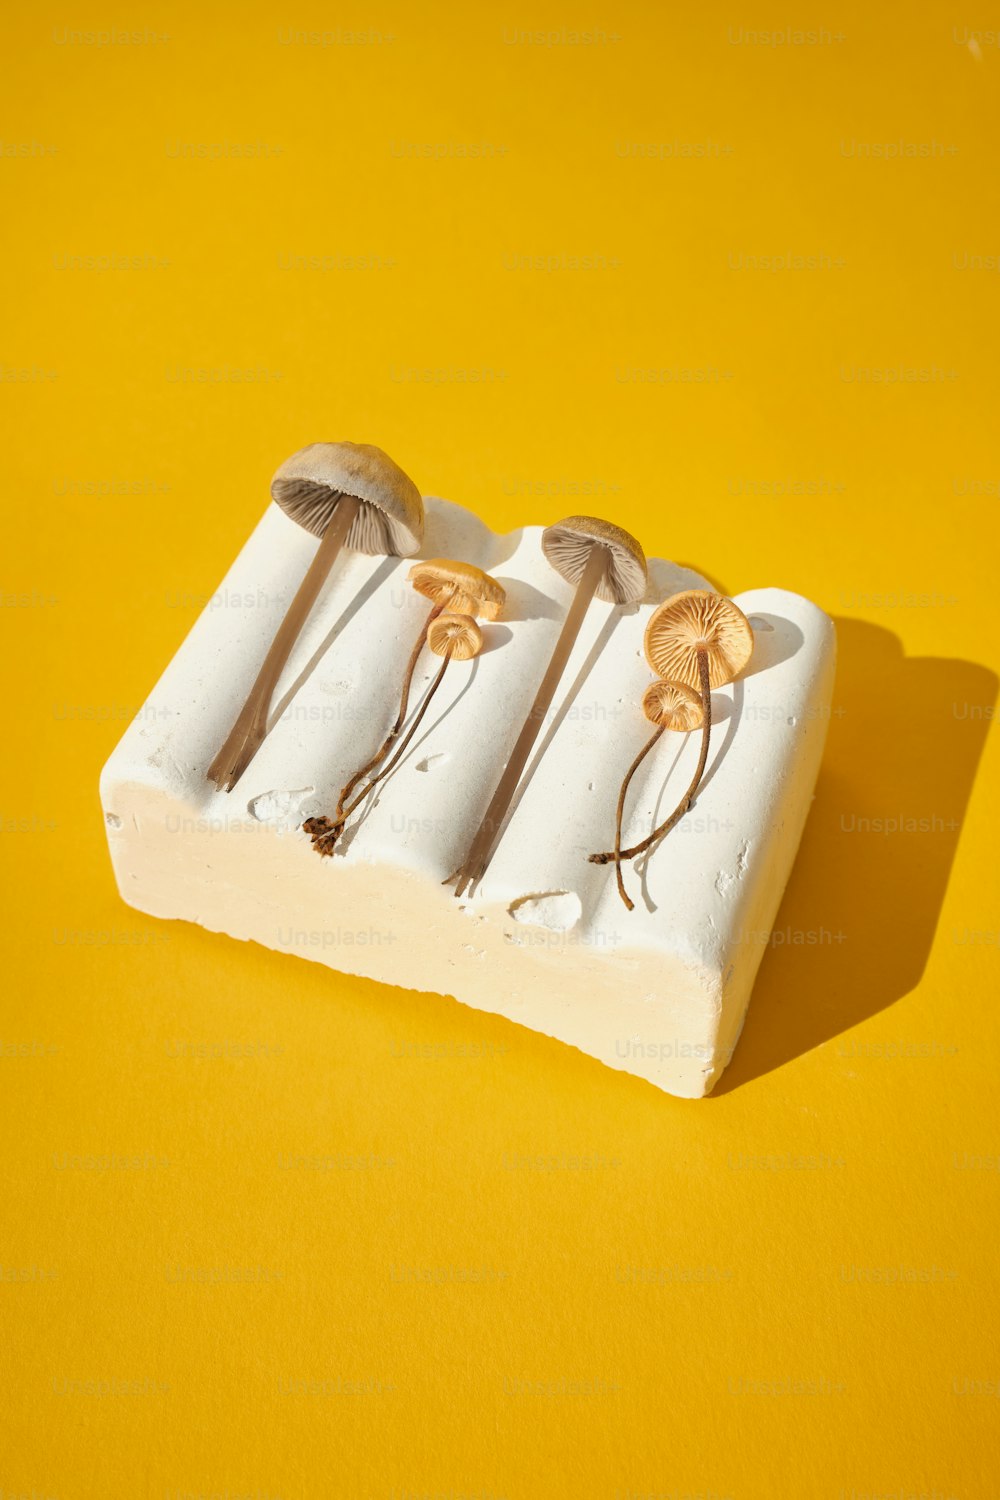 three small pieces of food with spoons on a yellow surface